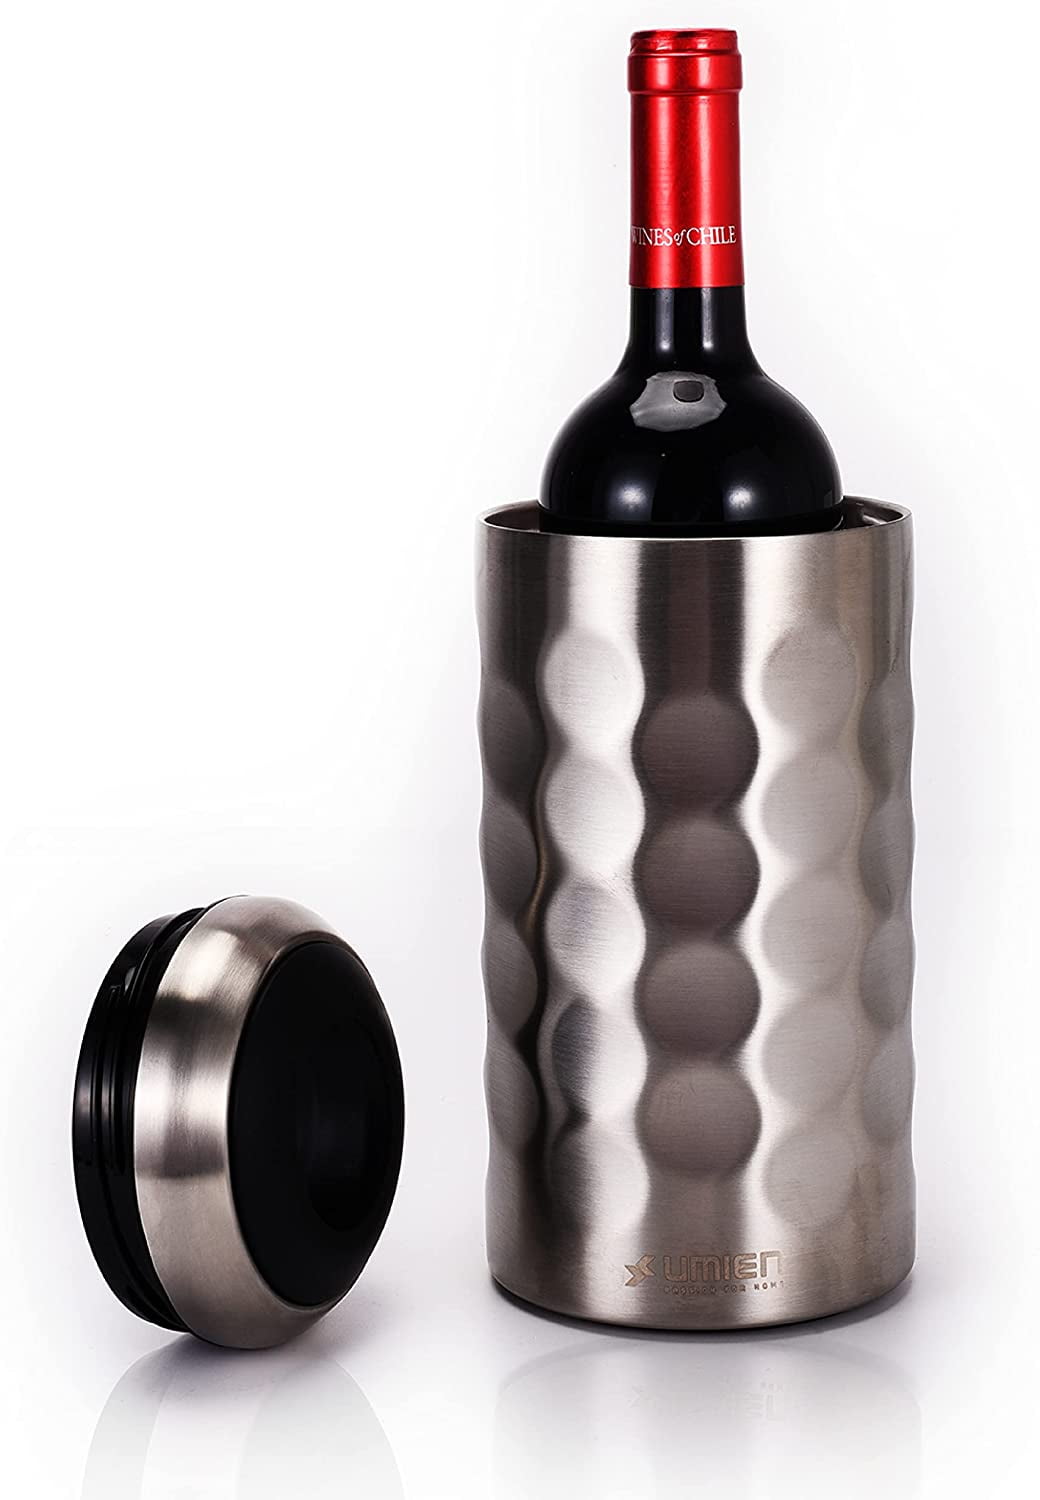 UMIEN Premium Wine Bottle Chiller - Double Walled, Vacuum Insulated Wine  Cooler for Most 750mL Champagne and Wine Bottles